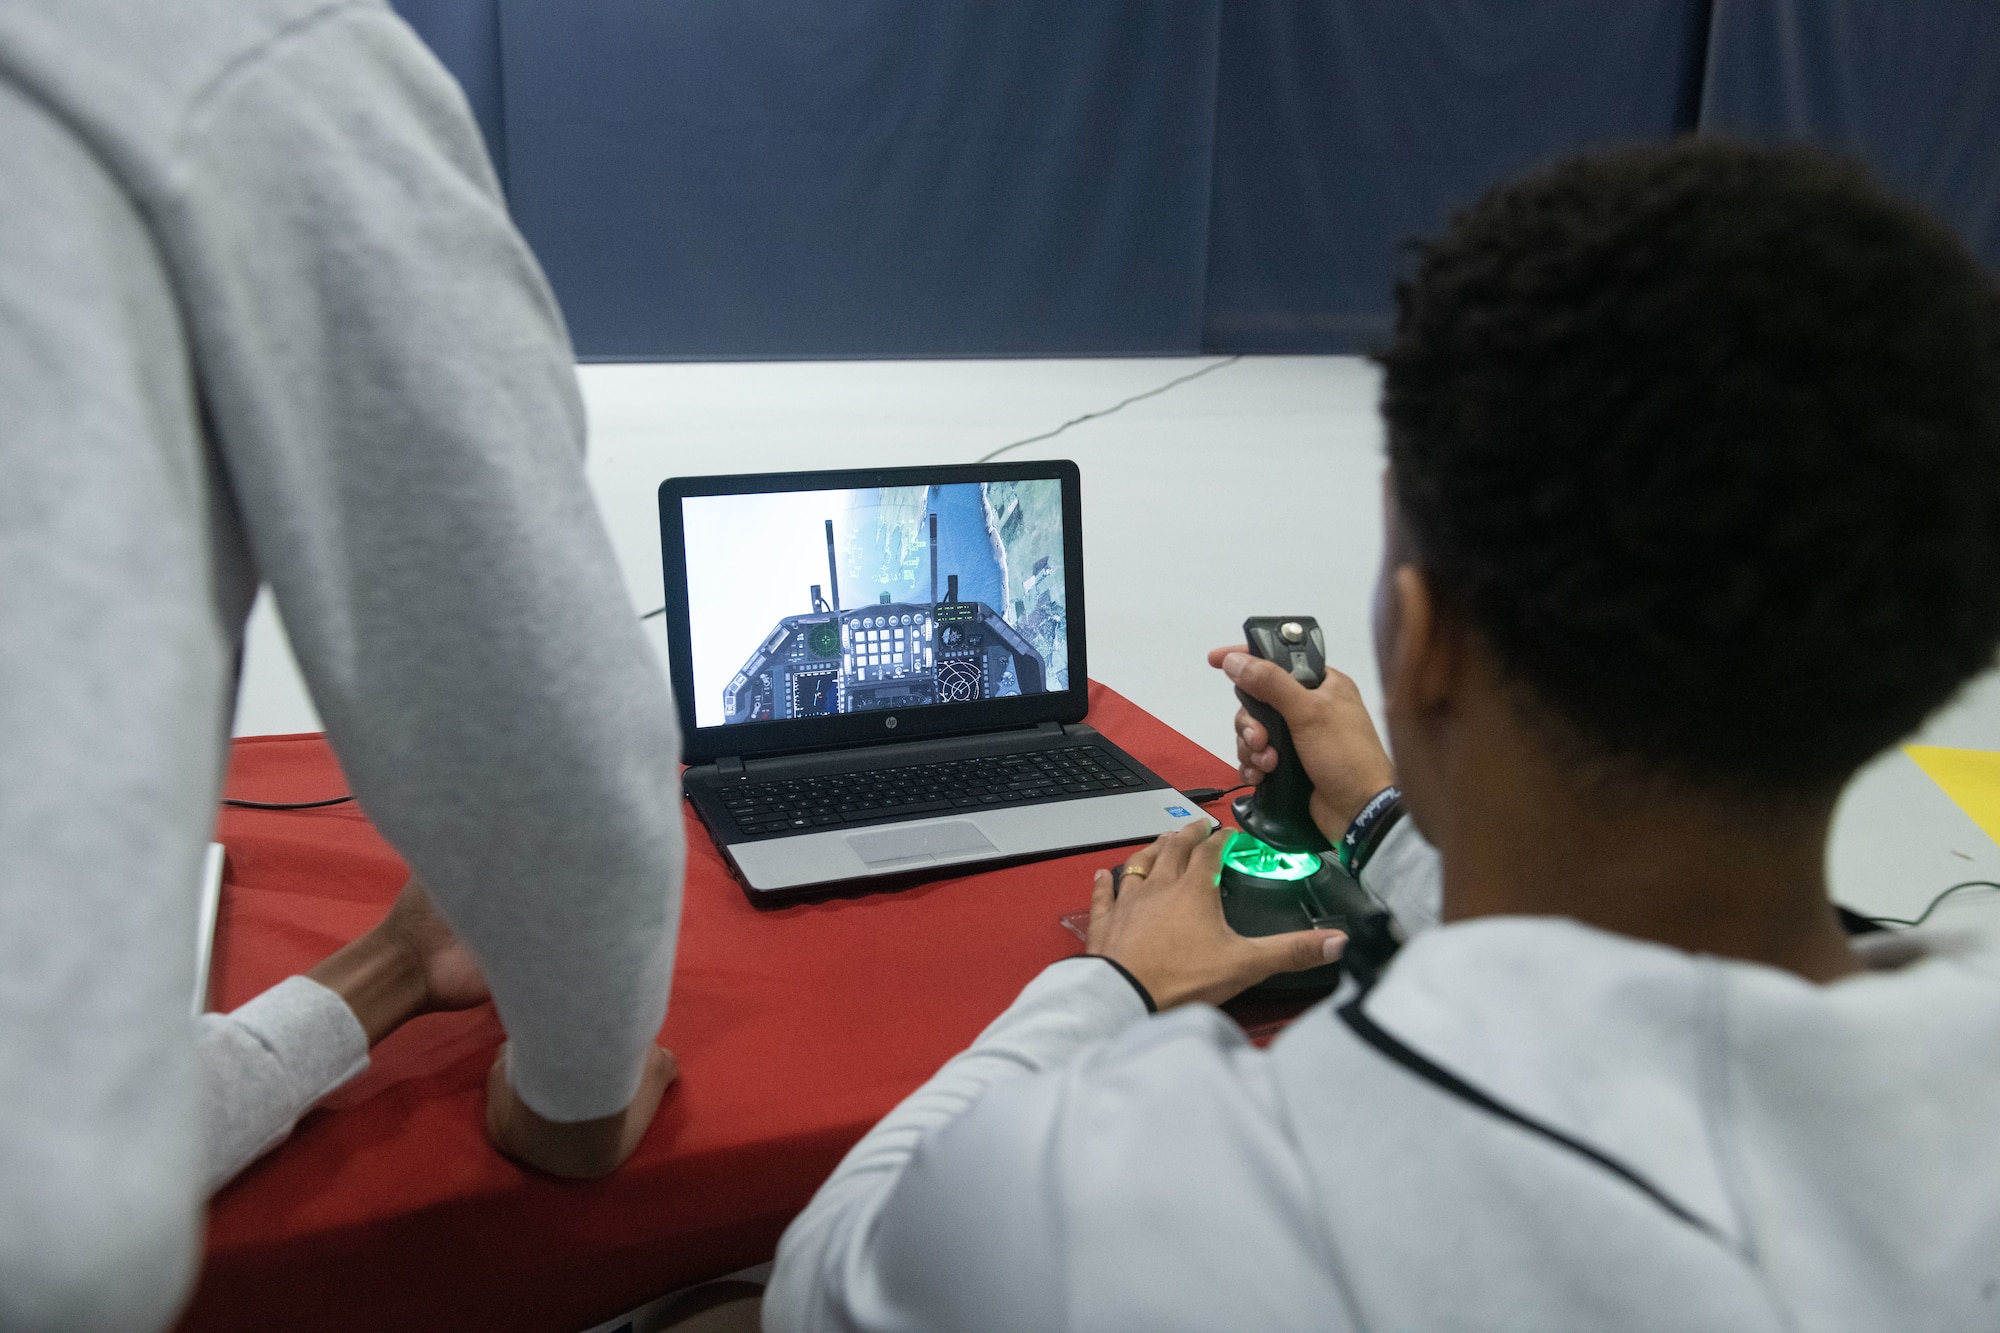 A student flies an aircraft simulation during a Science, Technology, Engineering, Arts and Mathematics event at Joint Base Andrews, Md., March 9, 2023. The event was held to garner interest in military STEAM related career fields. (U.S. Air Force photo by Senior Airman Daekwon Stith)